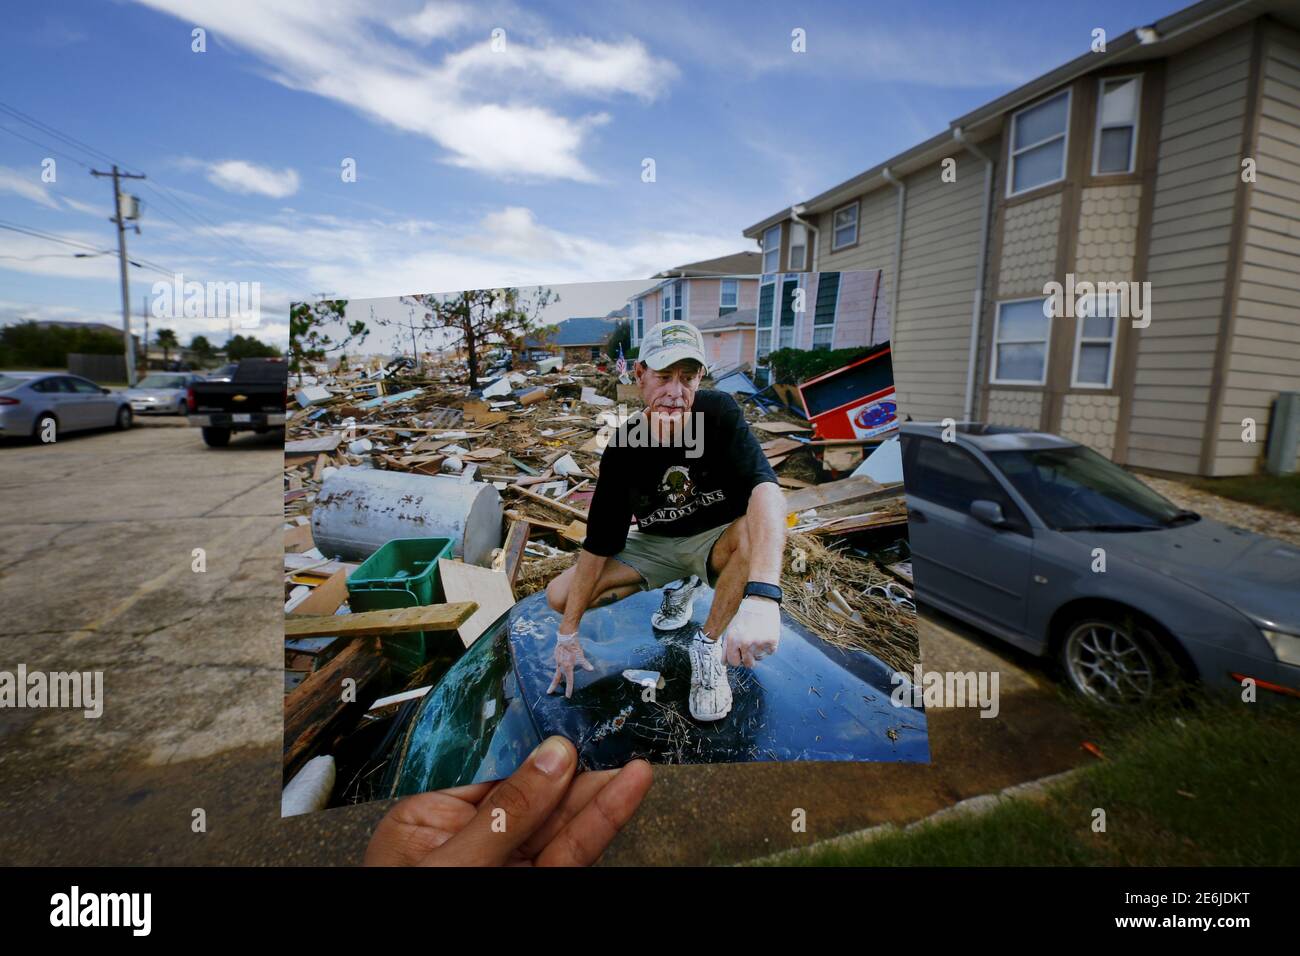 Photographer Carlos Barria holds a print of a photograph he took in 2005, as he matches it up at the same location 10 years on, in North Shore, northwest of New Orleans, United States, August 17, 2015. The print shows Michael Rehage squatting on the roof of his car, September 12, 2005, after Hurricane Katrina struck. In 2005, Hurricane Katrina triggered floods that inundated New Orleans and killed more than 1,500 people as storm waters overwhelmed levees and broke through floodwalls. Congress authorised spending more than $14 billion to beef up the city's flood protection after Katrina and bui Stock Photo